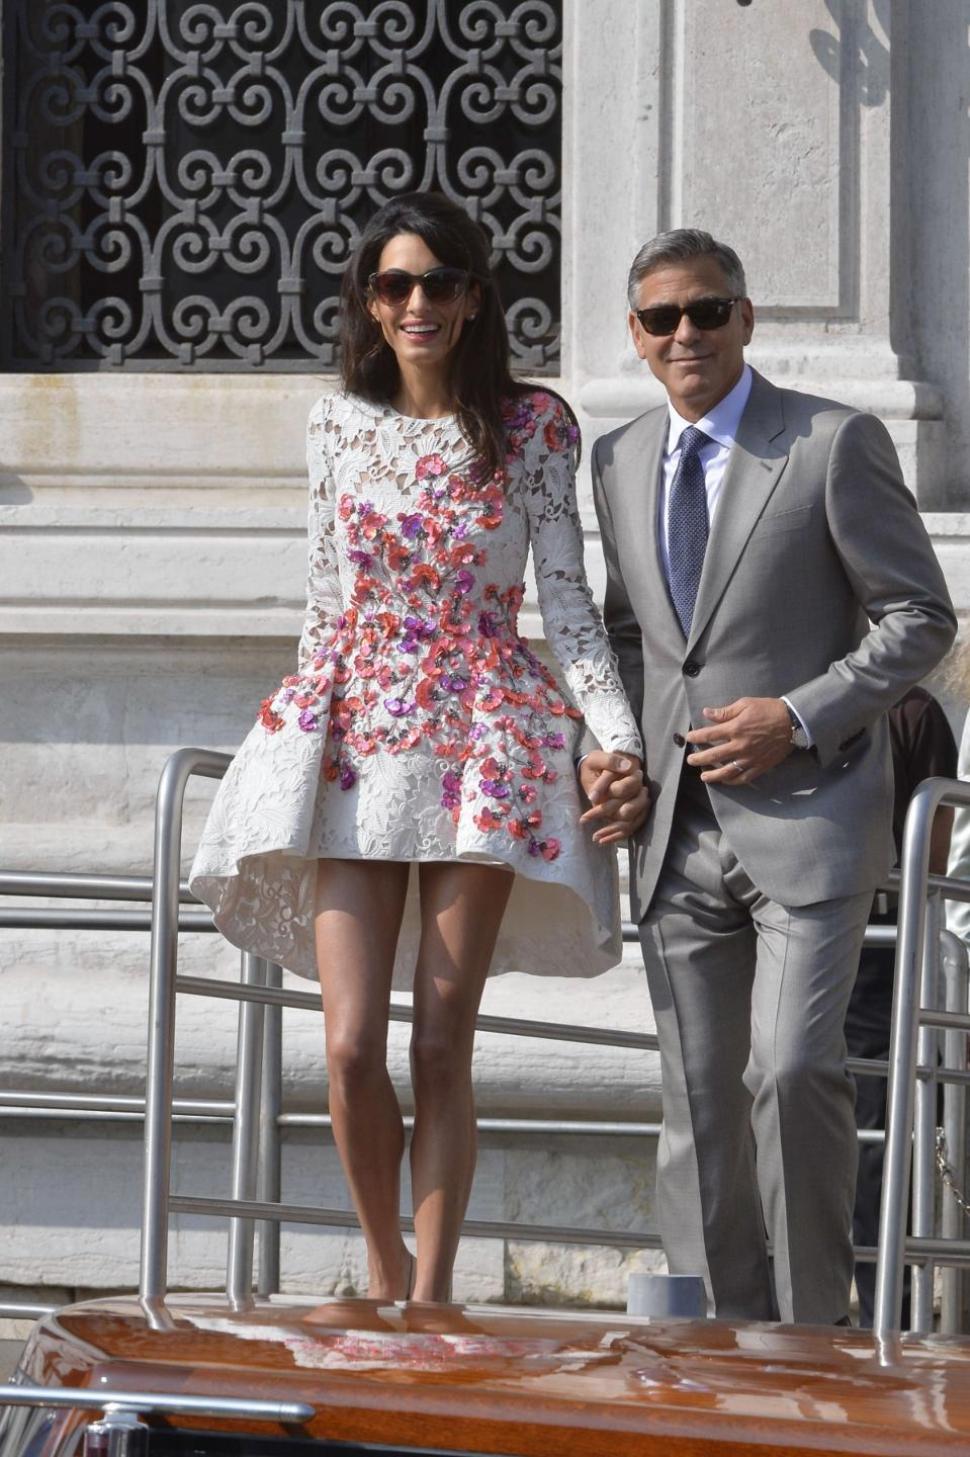 Mr. and Mrs. Clooney.